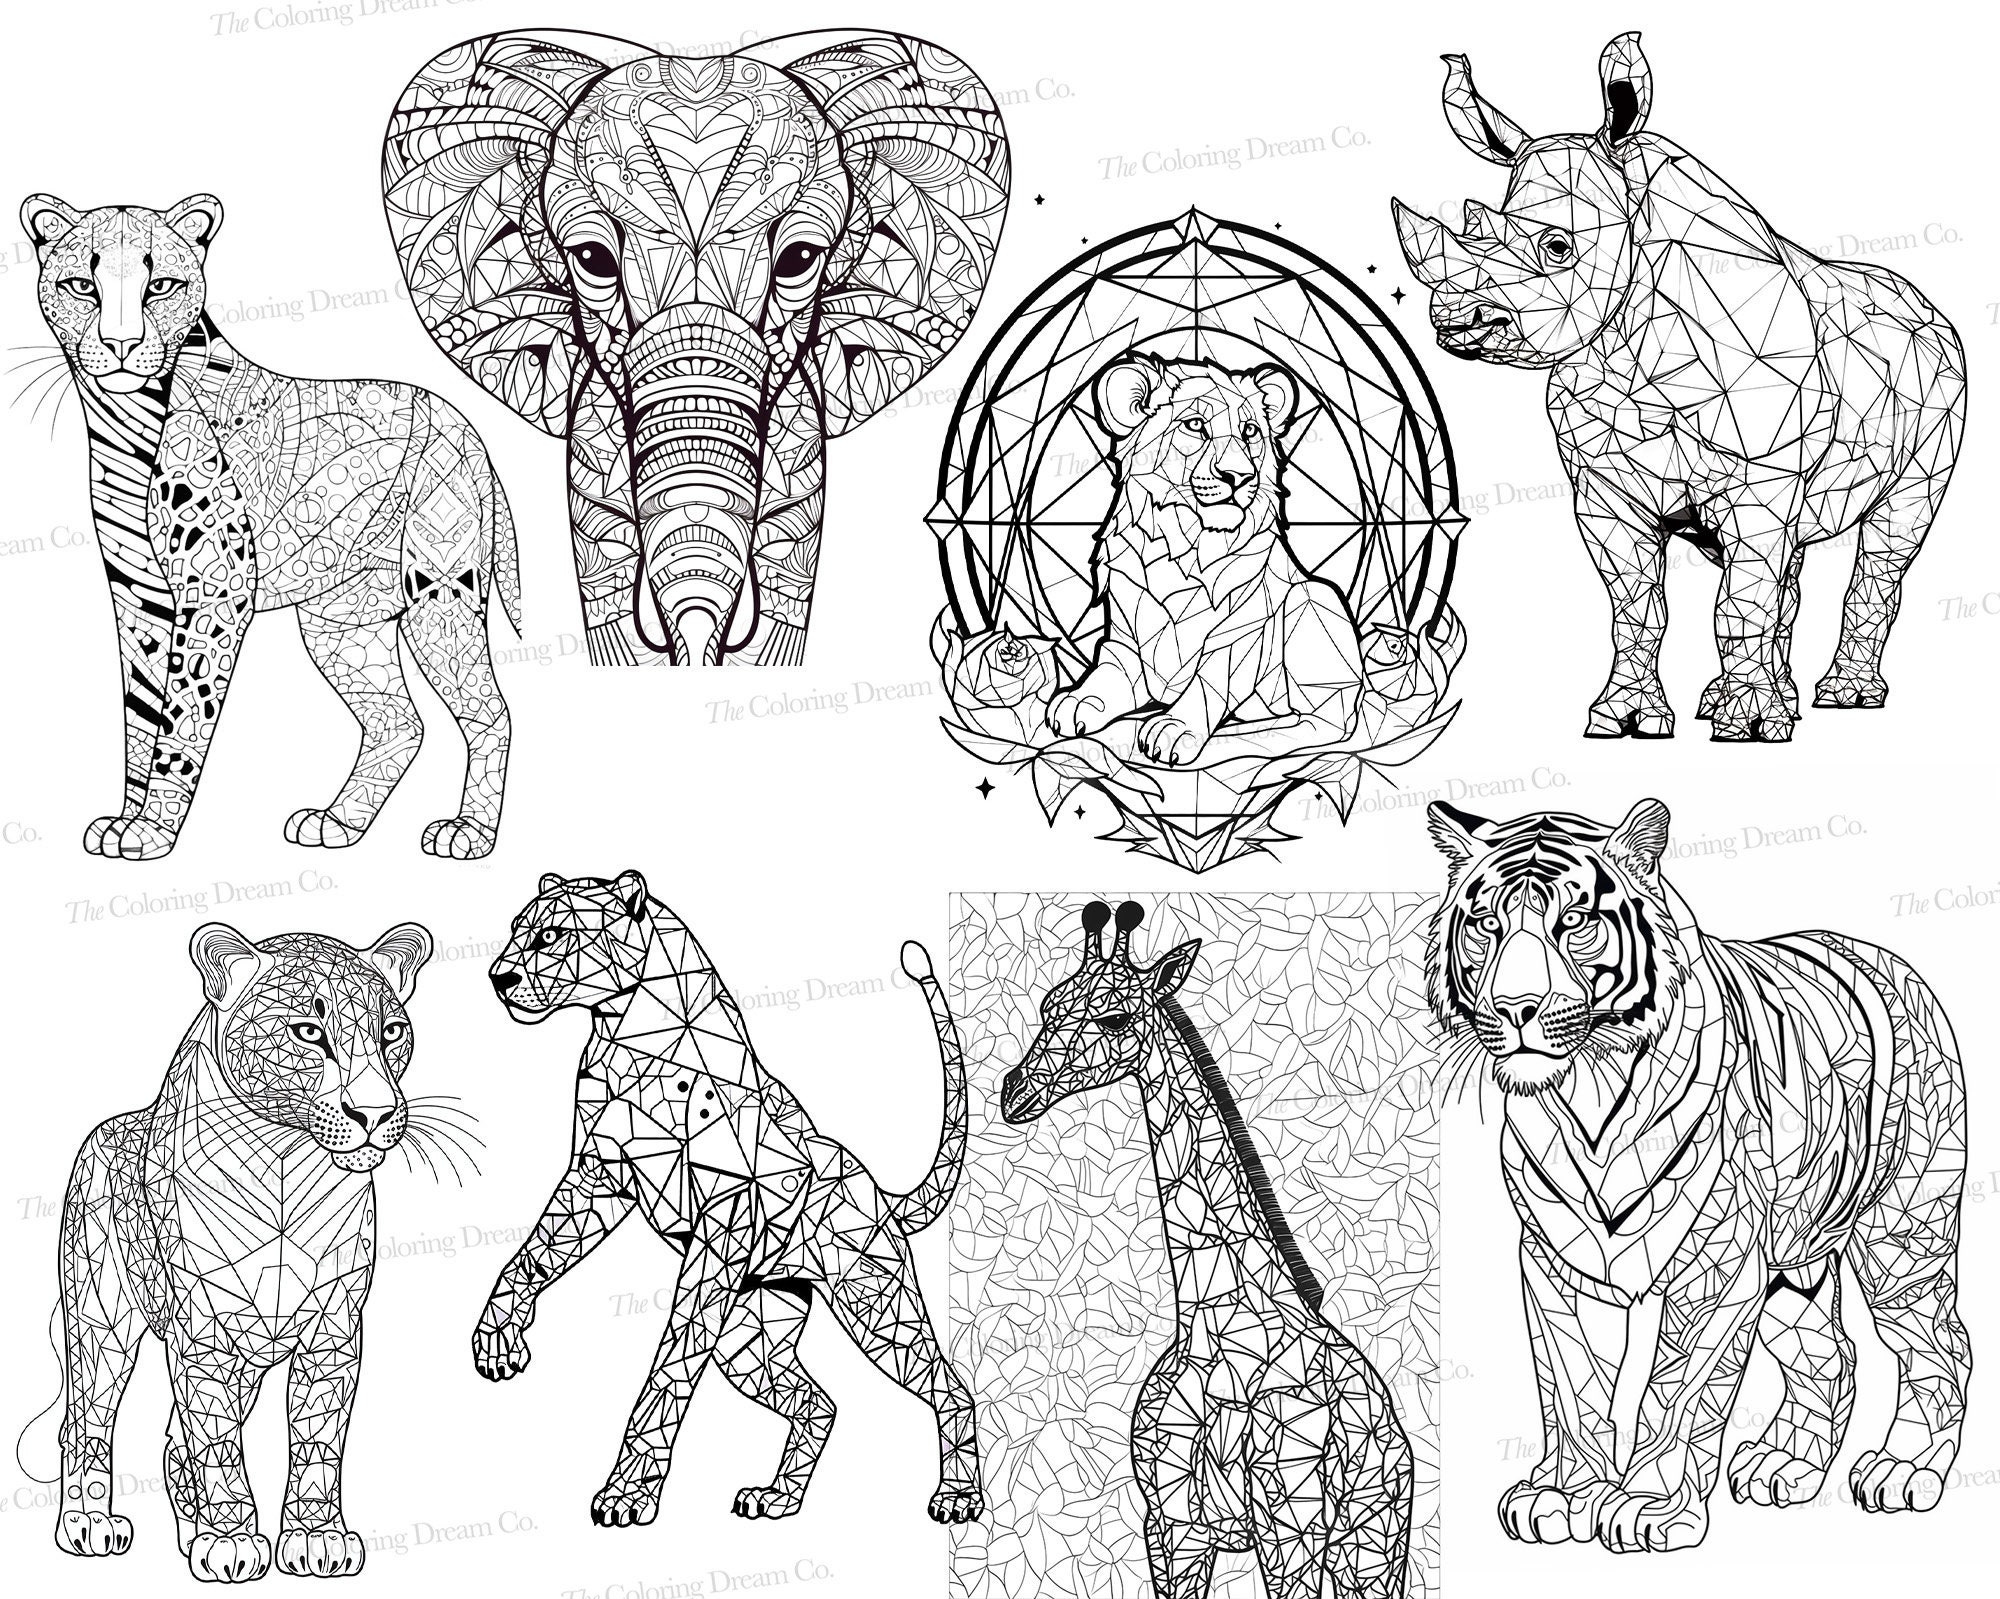 Animal Kingdom Adult Coloring Book: A Huge Adult Coloring Book of 60 Wild  Animal Designs in a Variety of Styles and Detailed Patterns (Animal  Coloring